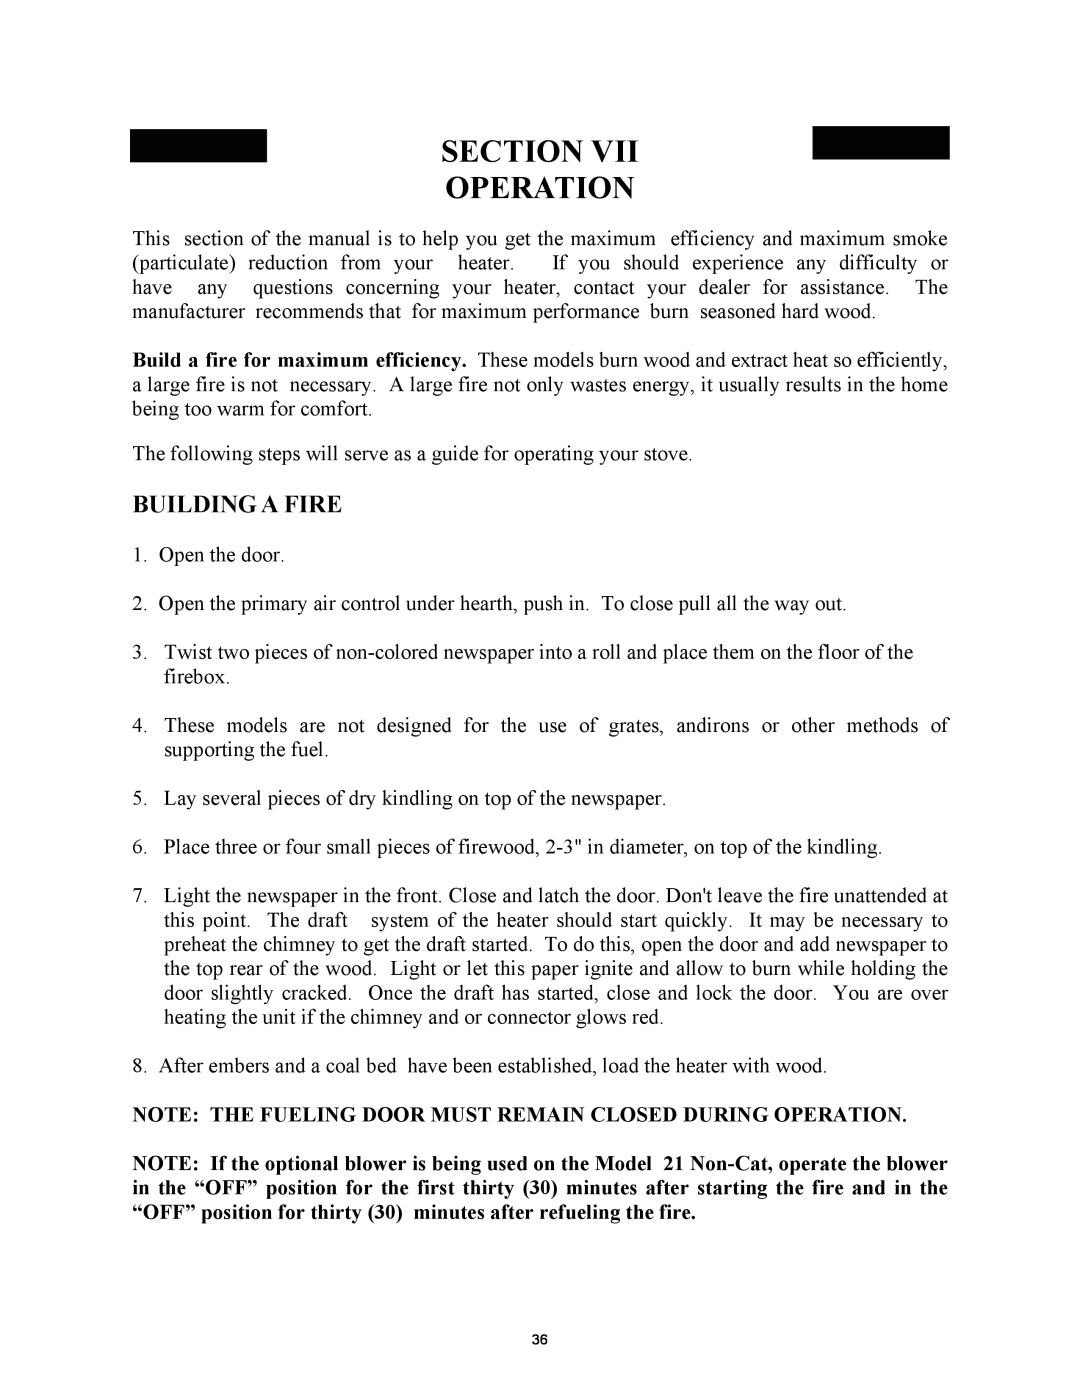 New Buck Corporation 21 installation instructions Section Operation, Building A Fire 